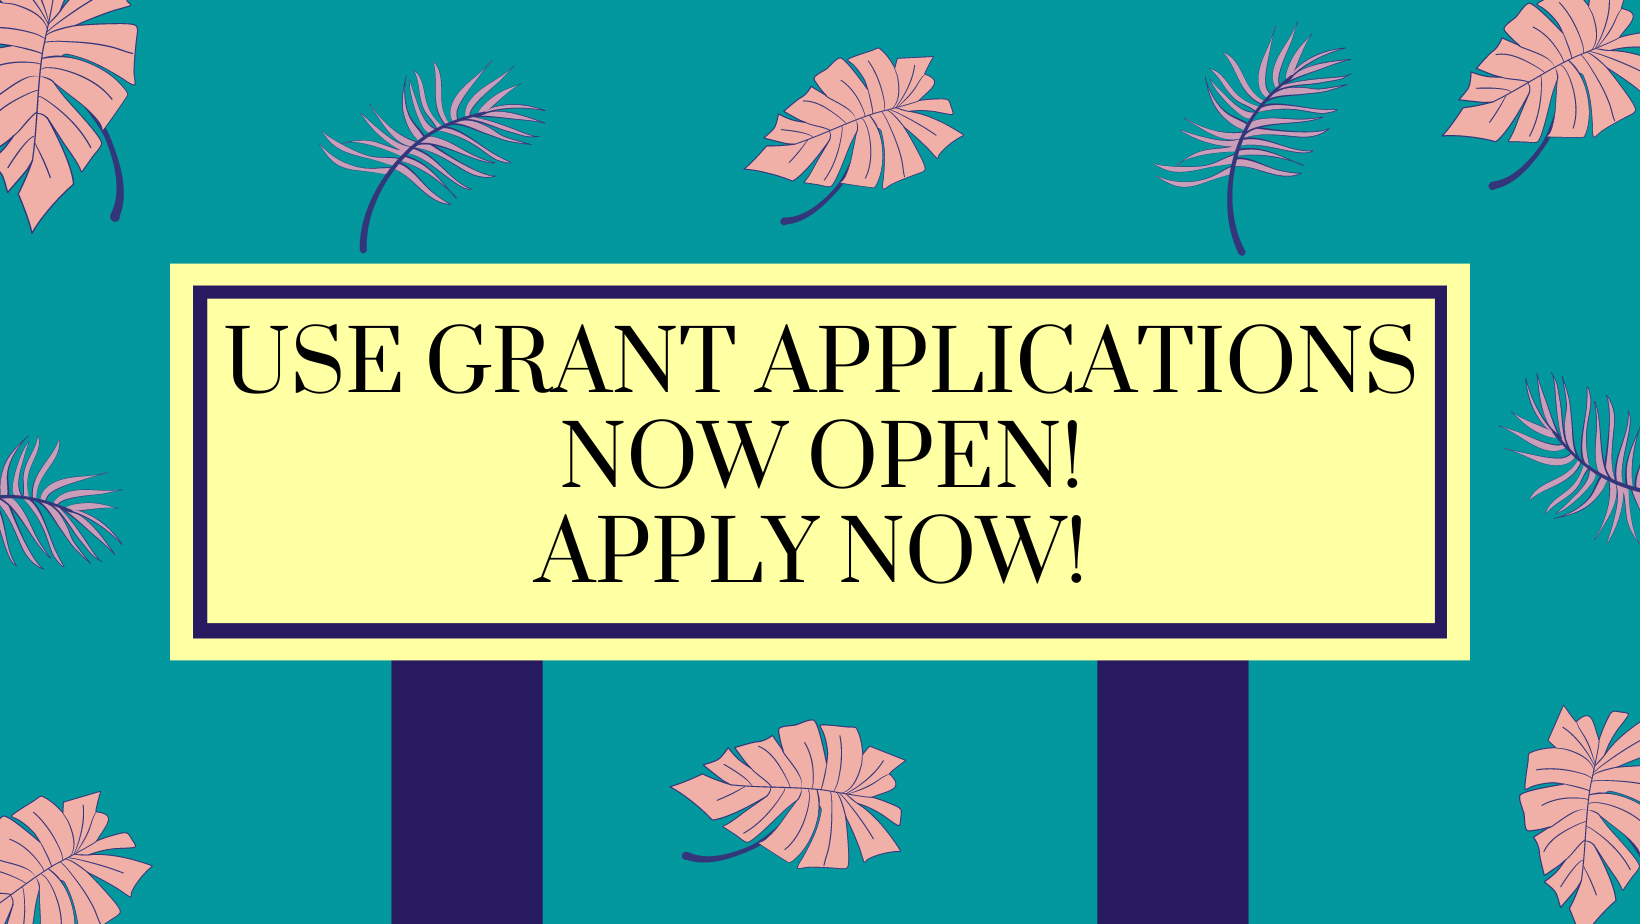 USE Grant Applications now Open (1)